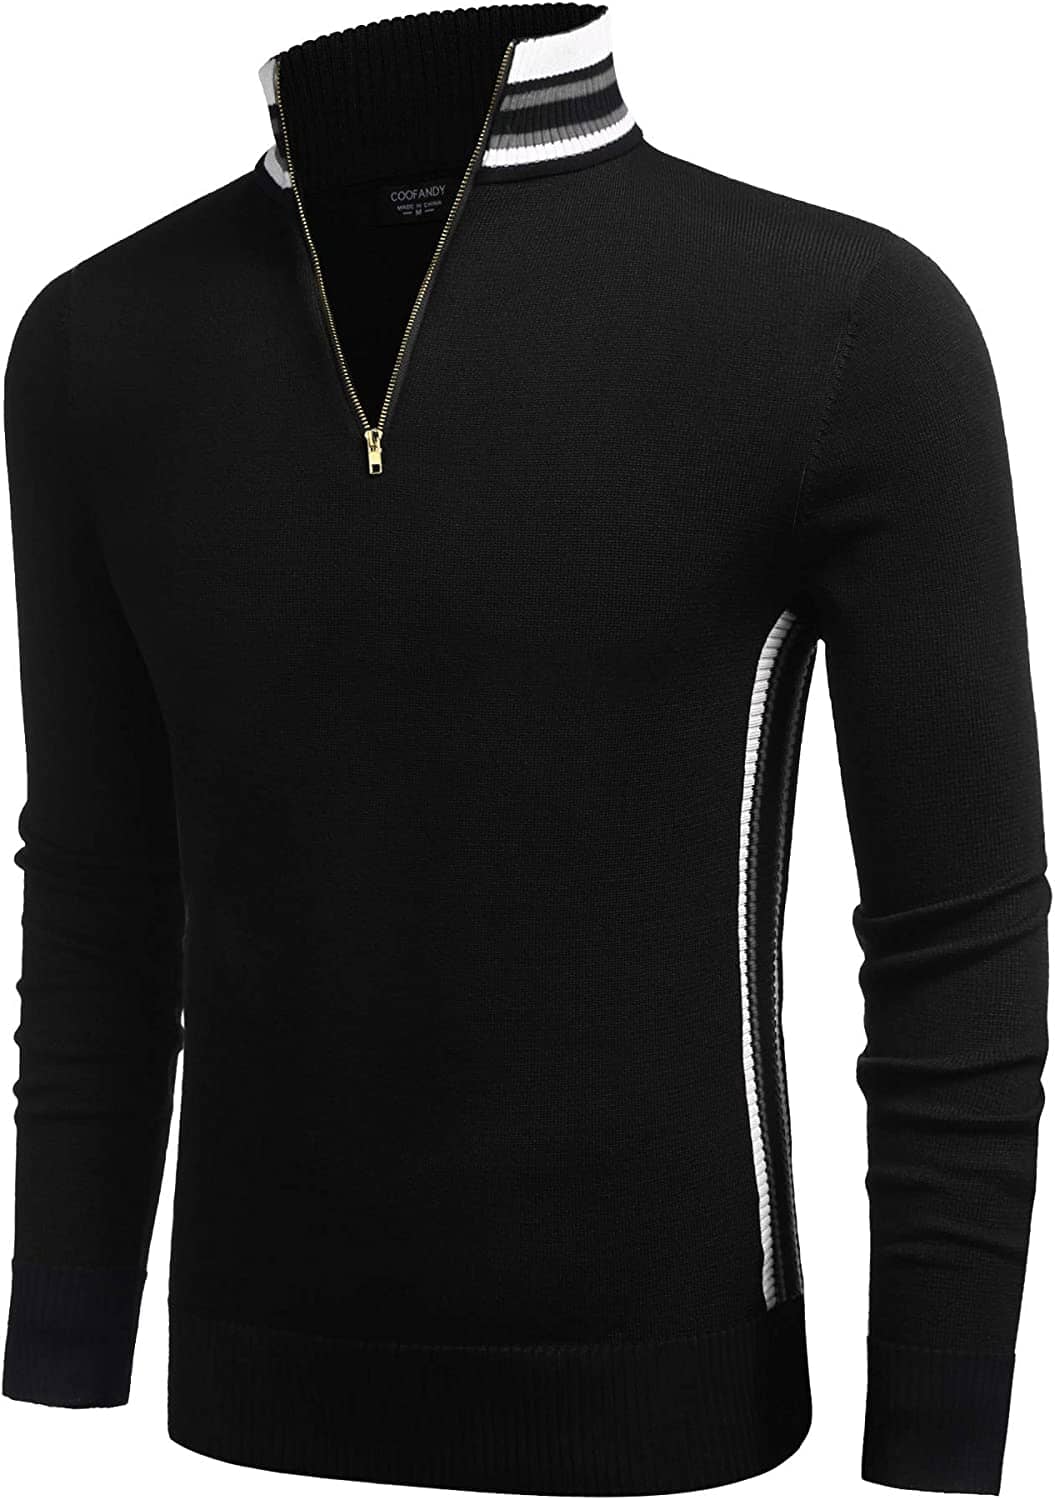 Striped Collar Pullover Sweater (US Only) Sweaters COOFANDY Store Black M 